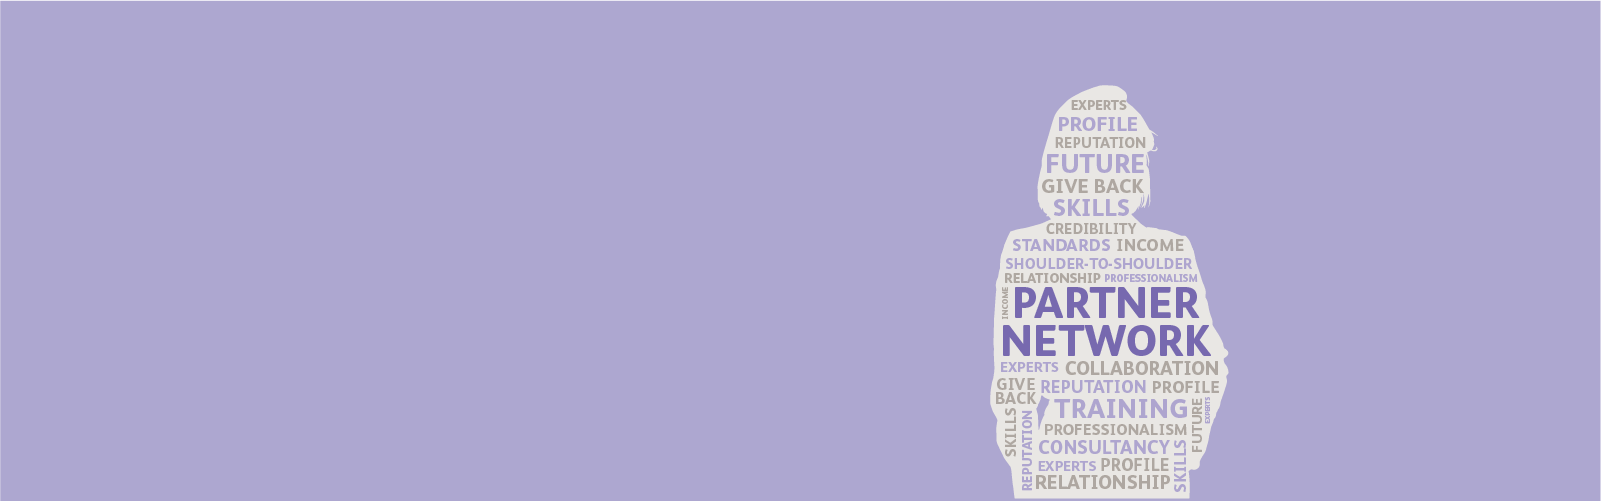 Silhouette of a person on a purple background. Within the silhouette are the words 'partner network' in bold surrounded by other words such as 'training' 'professionalism' skills' 'experts'